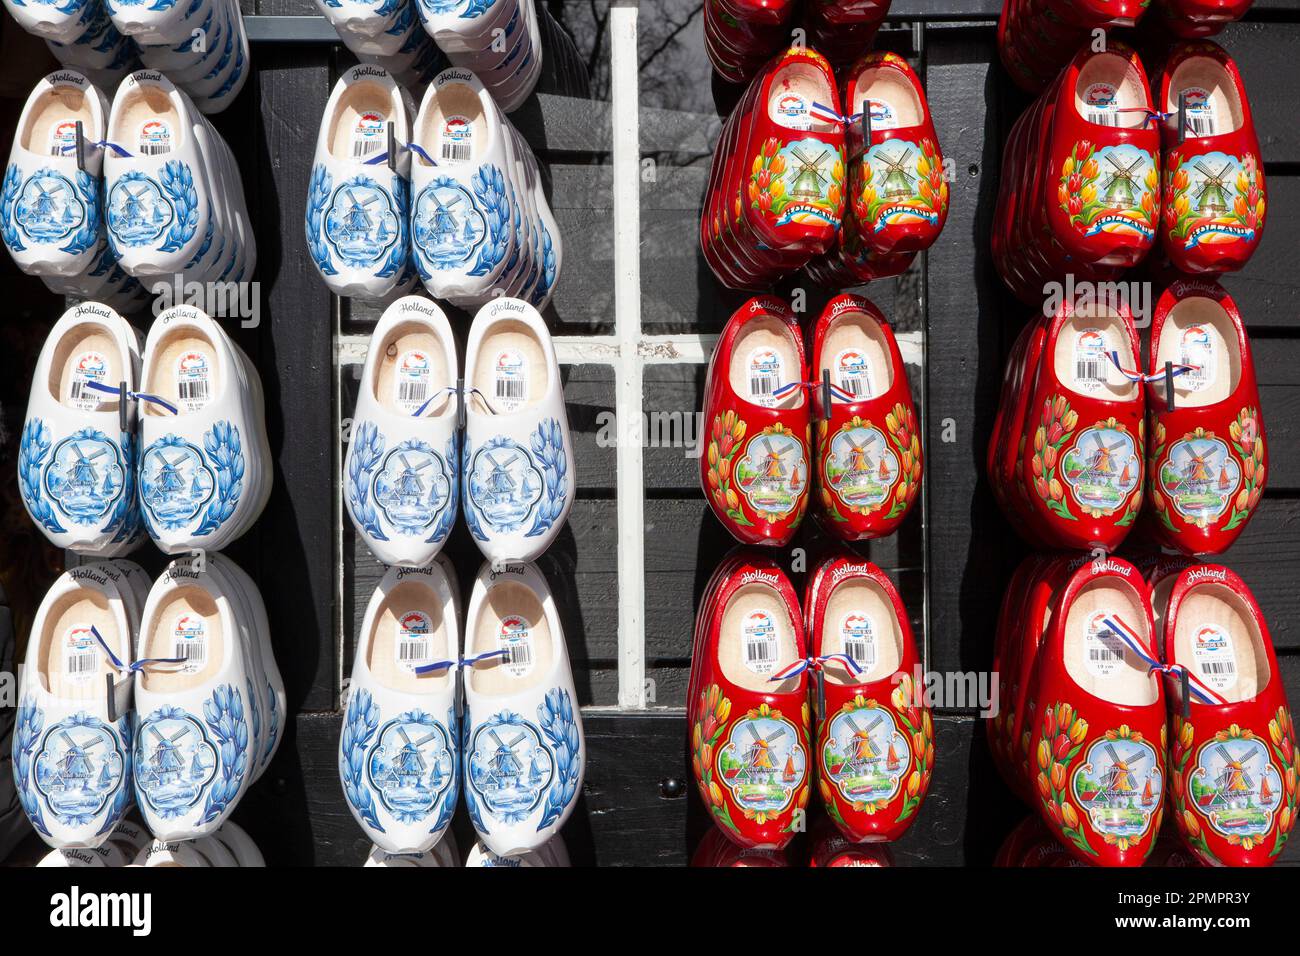 Amsterdam, The Netherlands, 23 March 2023: Souvenir Dutch clogs decorated with images of tulips and windmills, for sale at the Keukenhof gardens. Anna Stock Photo